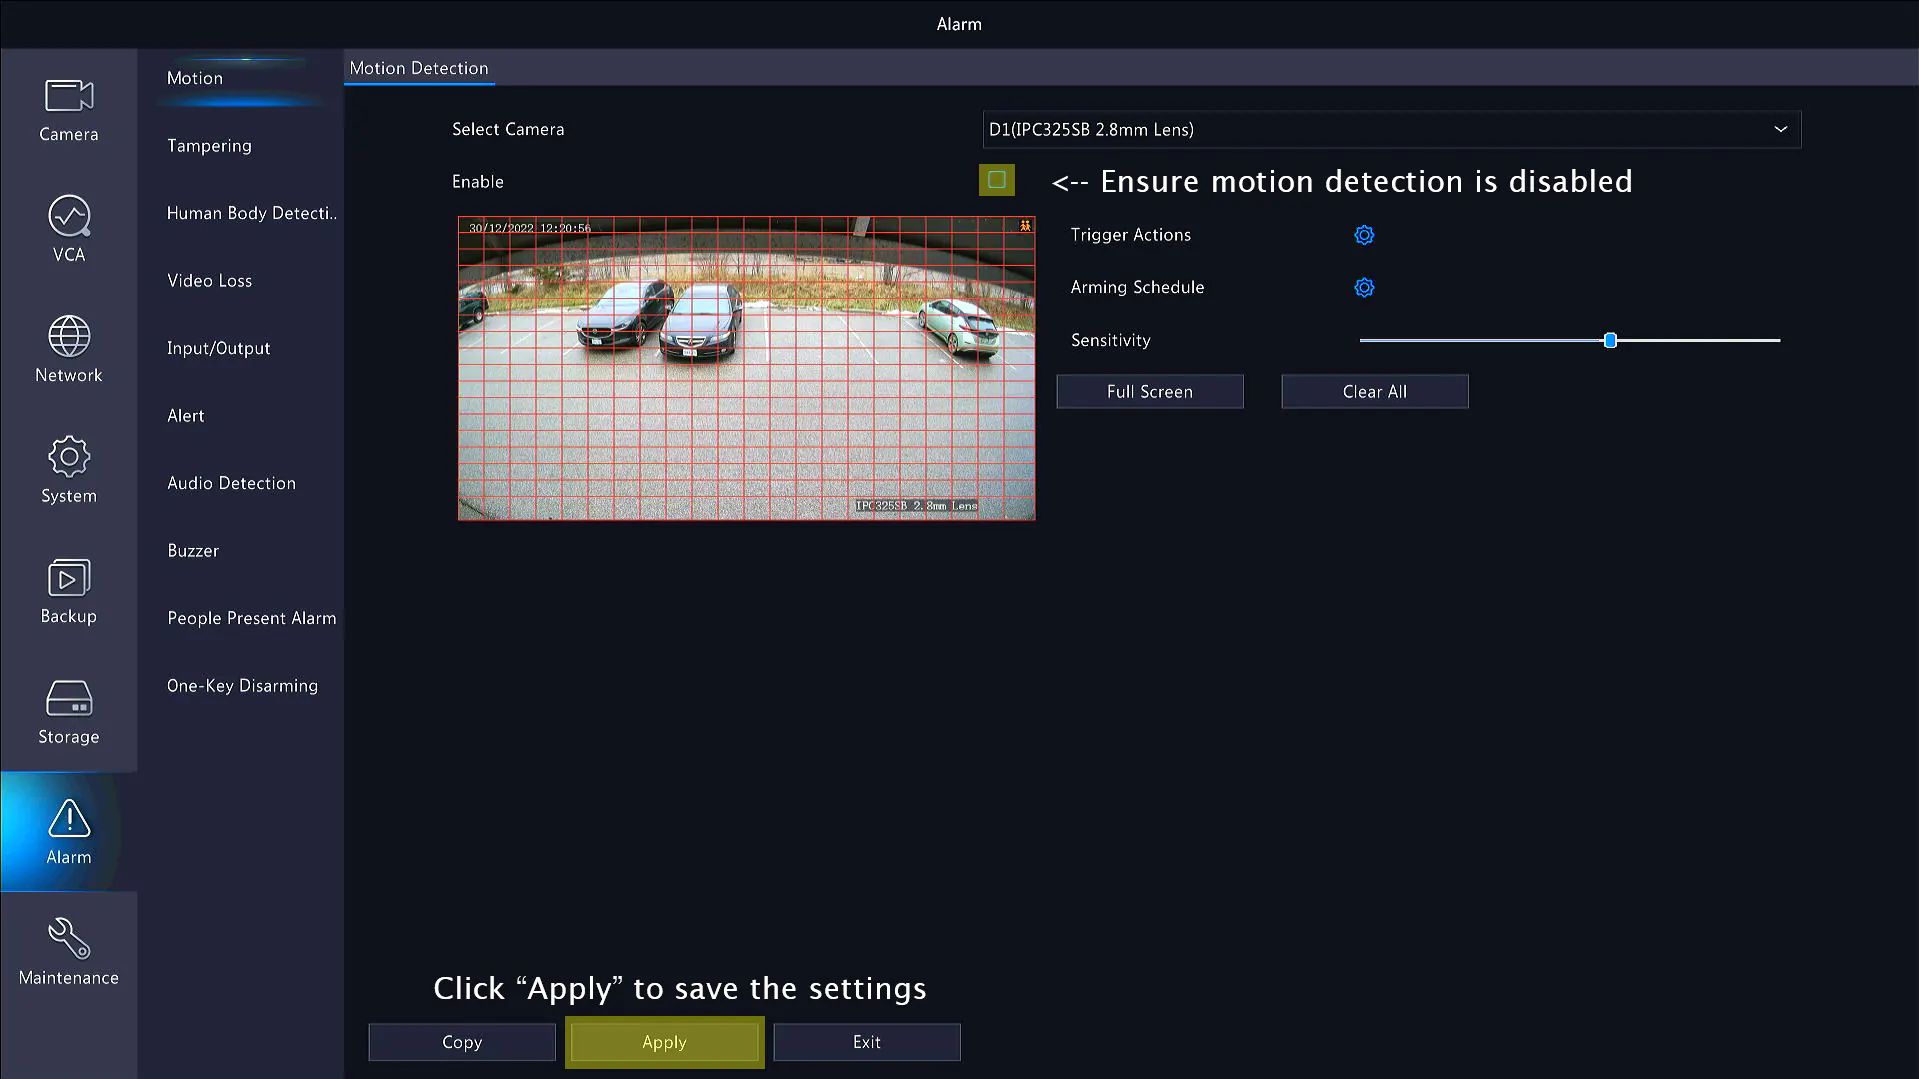 (4) To resolve the error, navigate to Alarm -> Motion and disable motion detection.